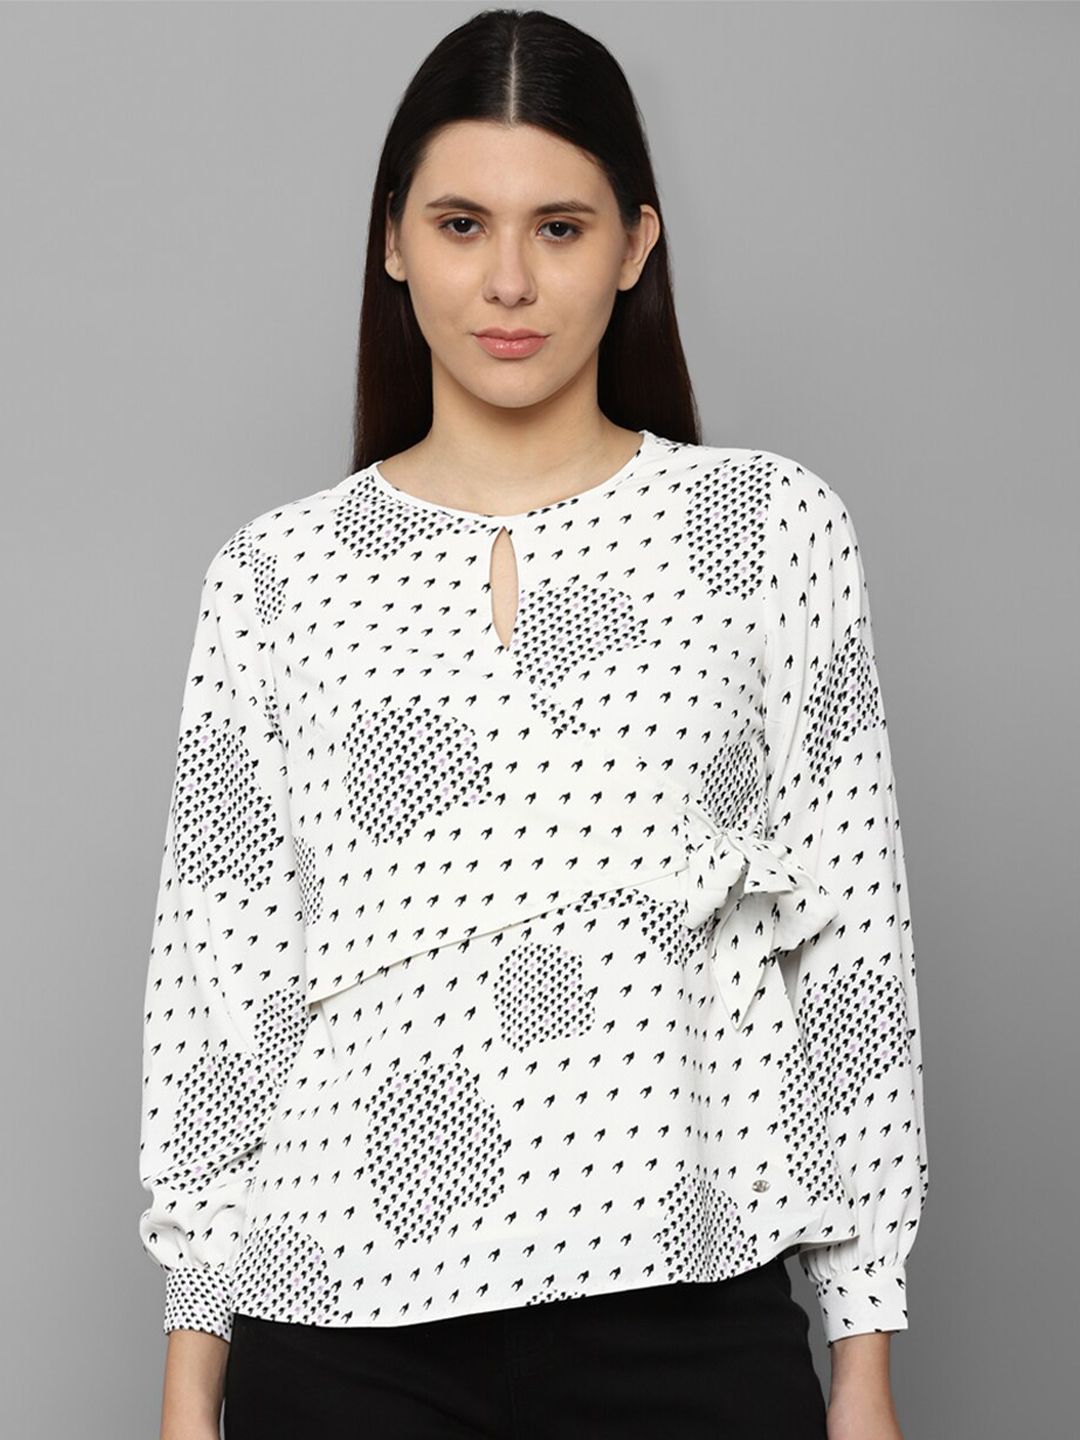 Allen Solly Woman White & Black Print Keyhole Neck Top Price in India